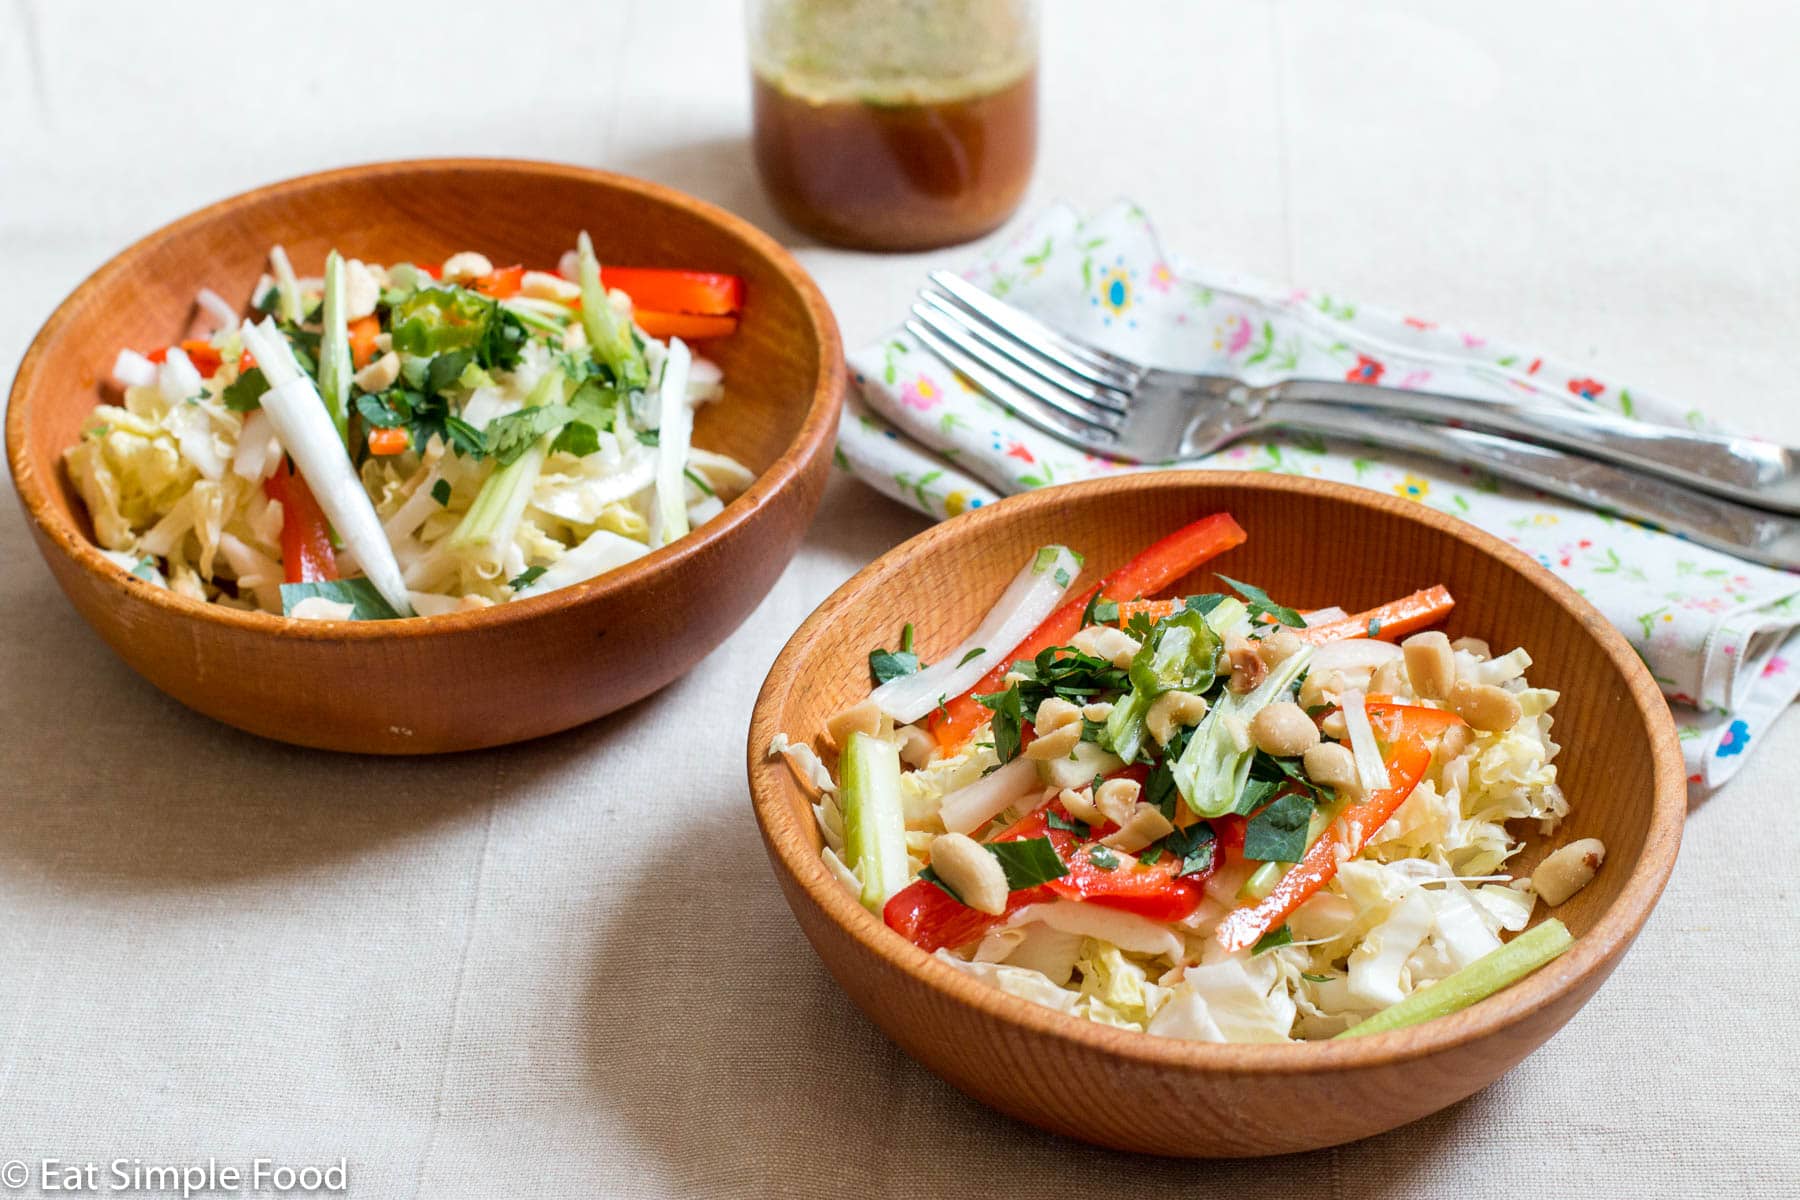 2 wood bowls of cole slaw with sliced red peppers, green onions and celery with cilantro and peanut garnish. Dressing, two forks and napkins in background.